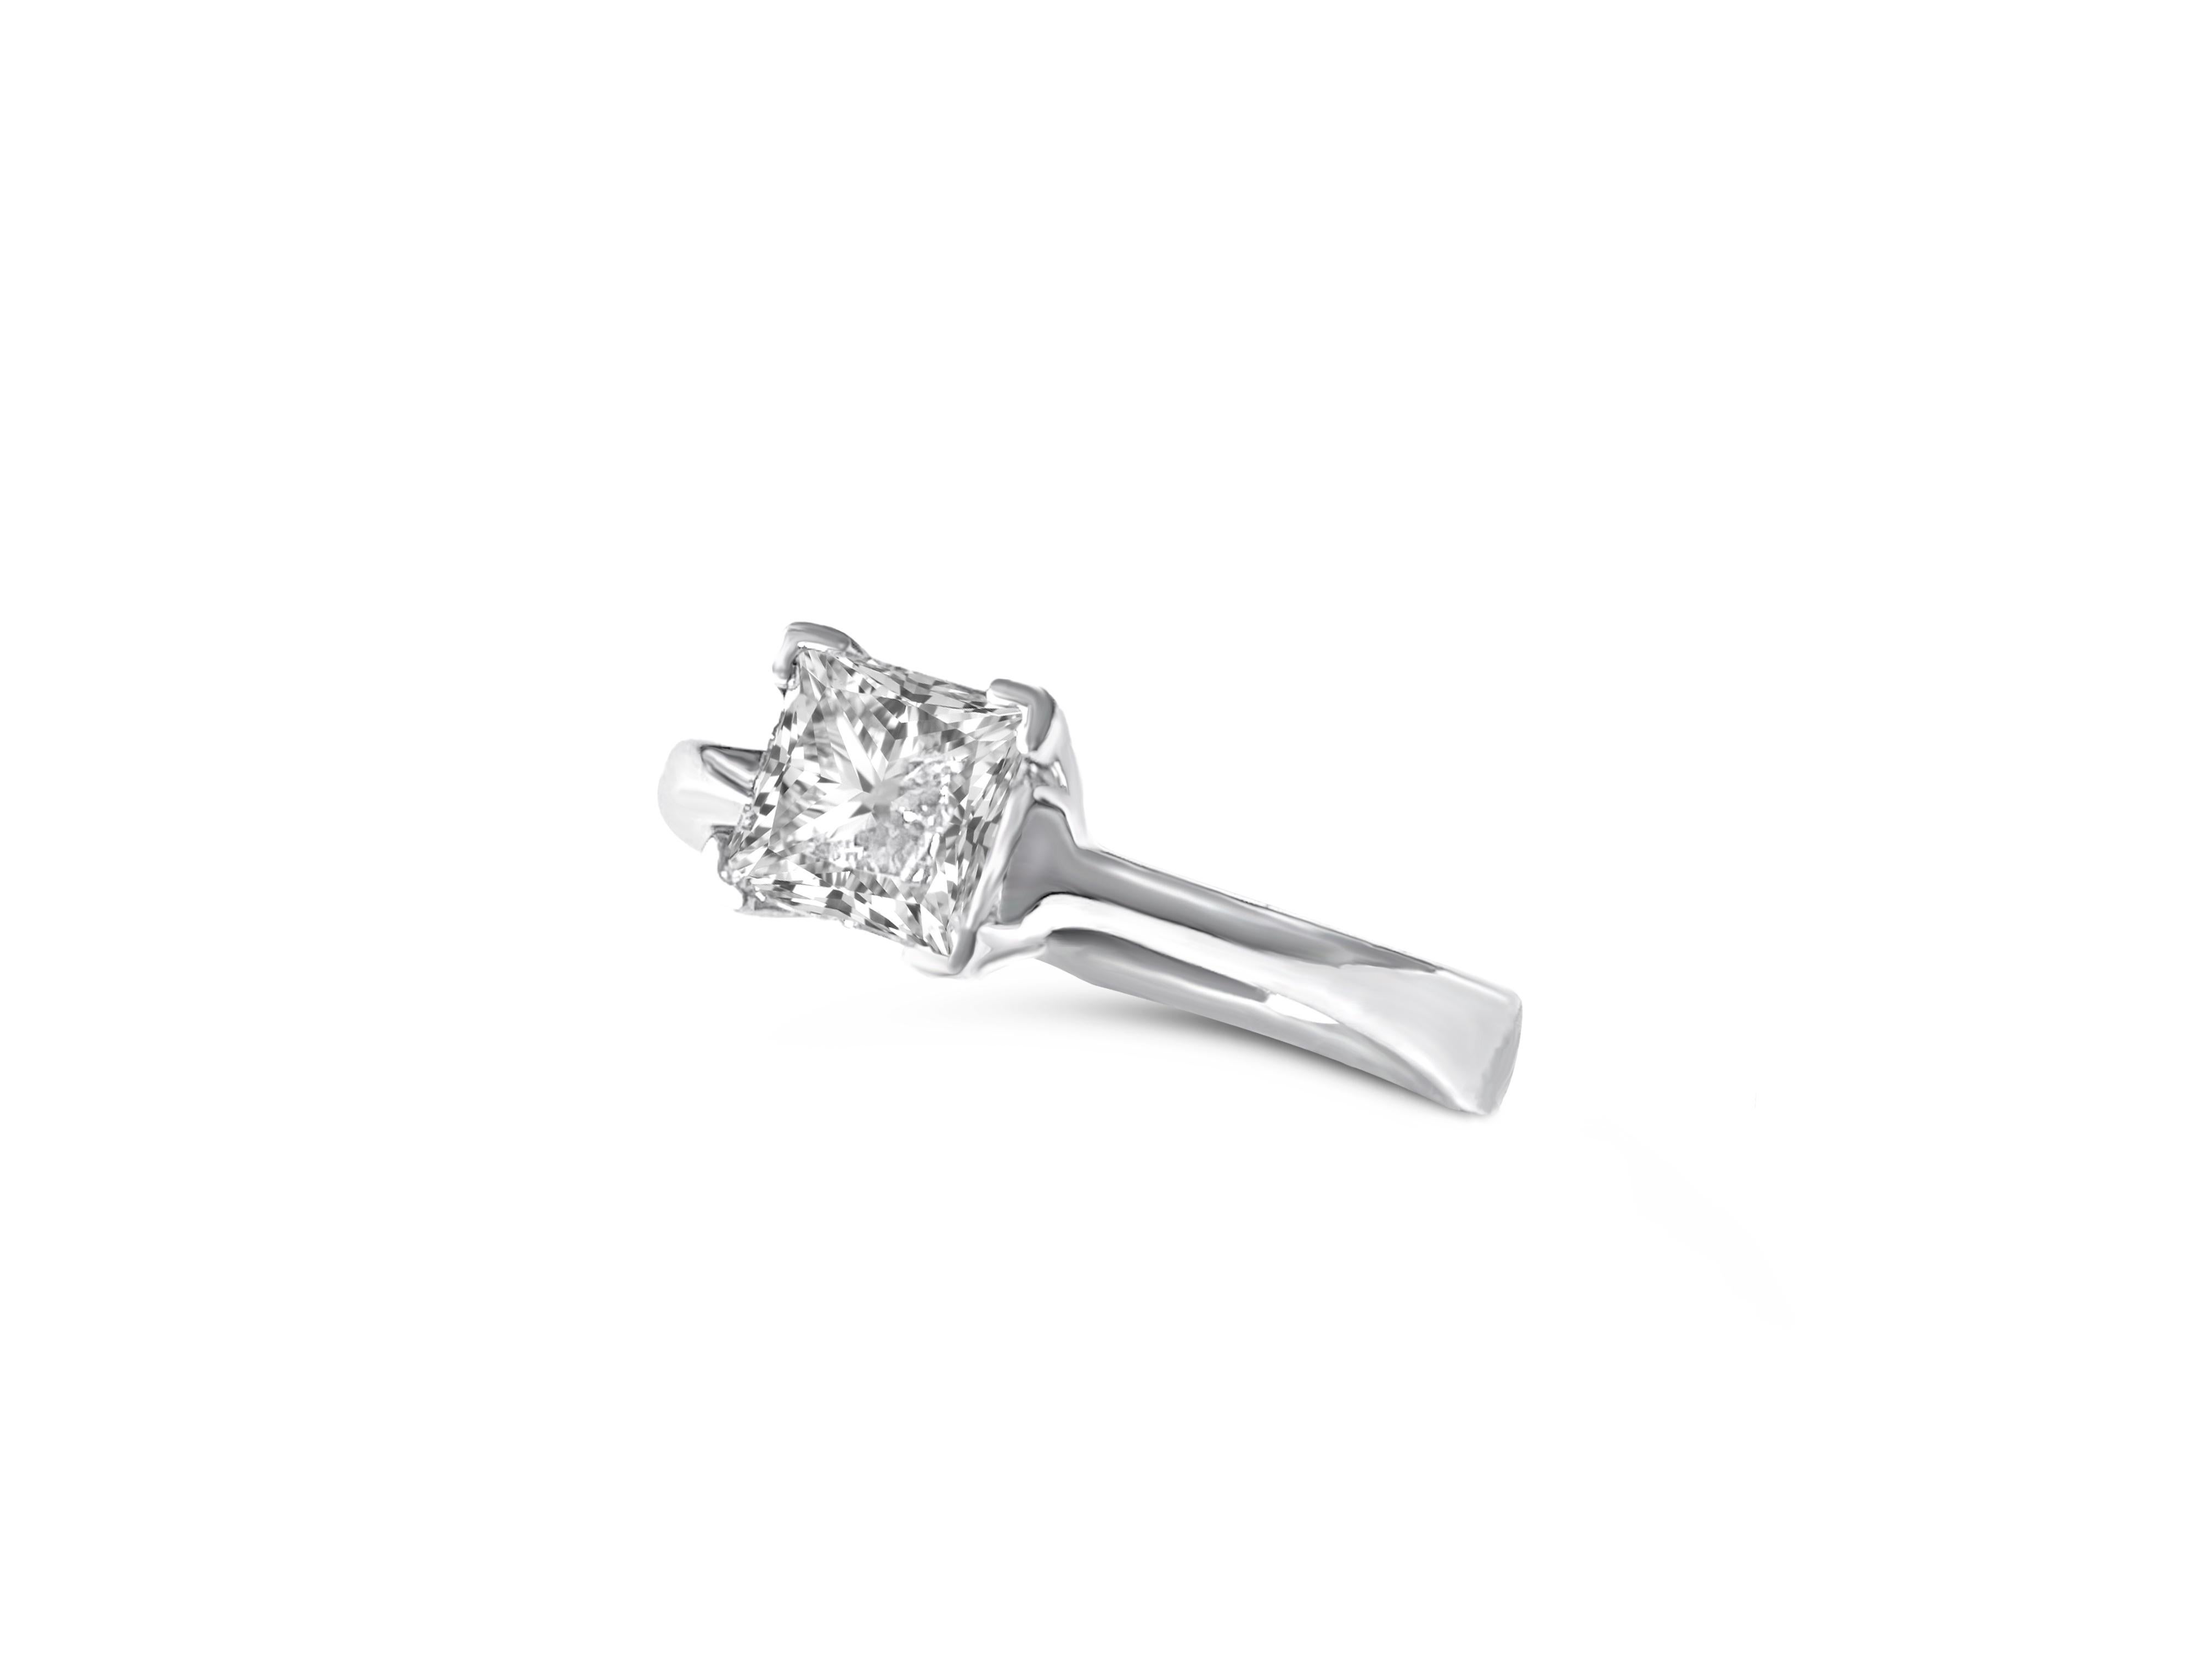 Elegance in a gem, this 14K white gold masterpiece features a dazzling 1.00-carat princess cut diamond, set in prongs for a stunning display. Impeccably clean and clarity enhanced, it's a divine choice for celebrations.

Key Features:

Precious